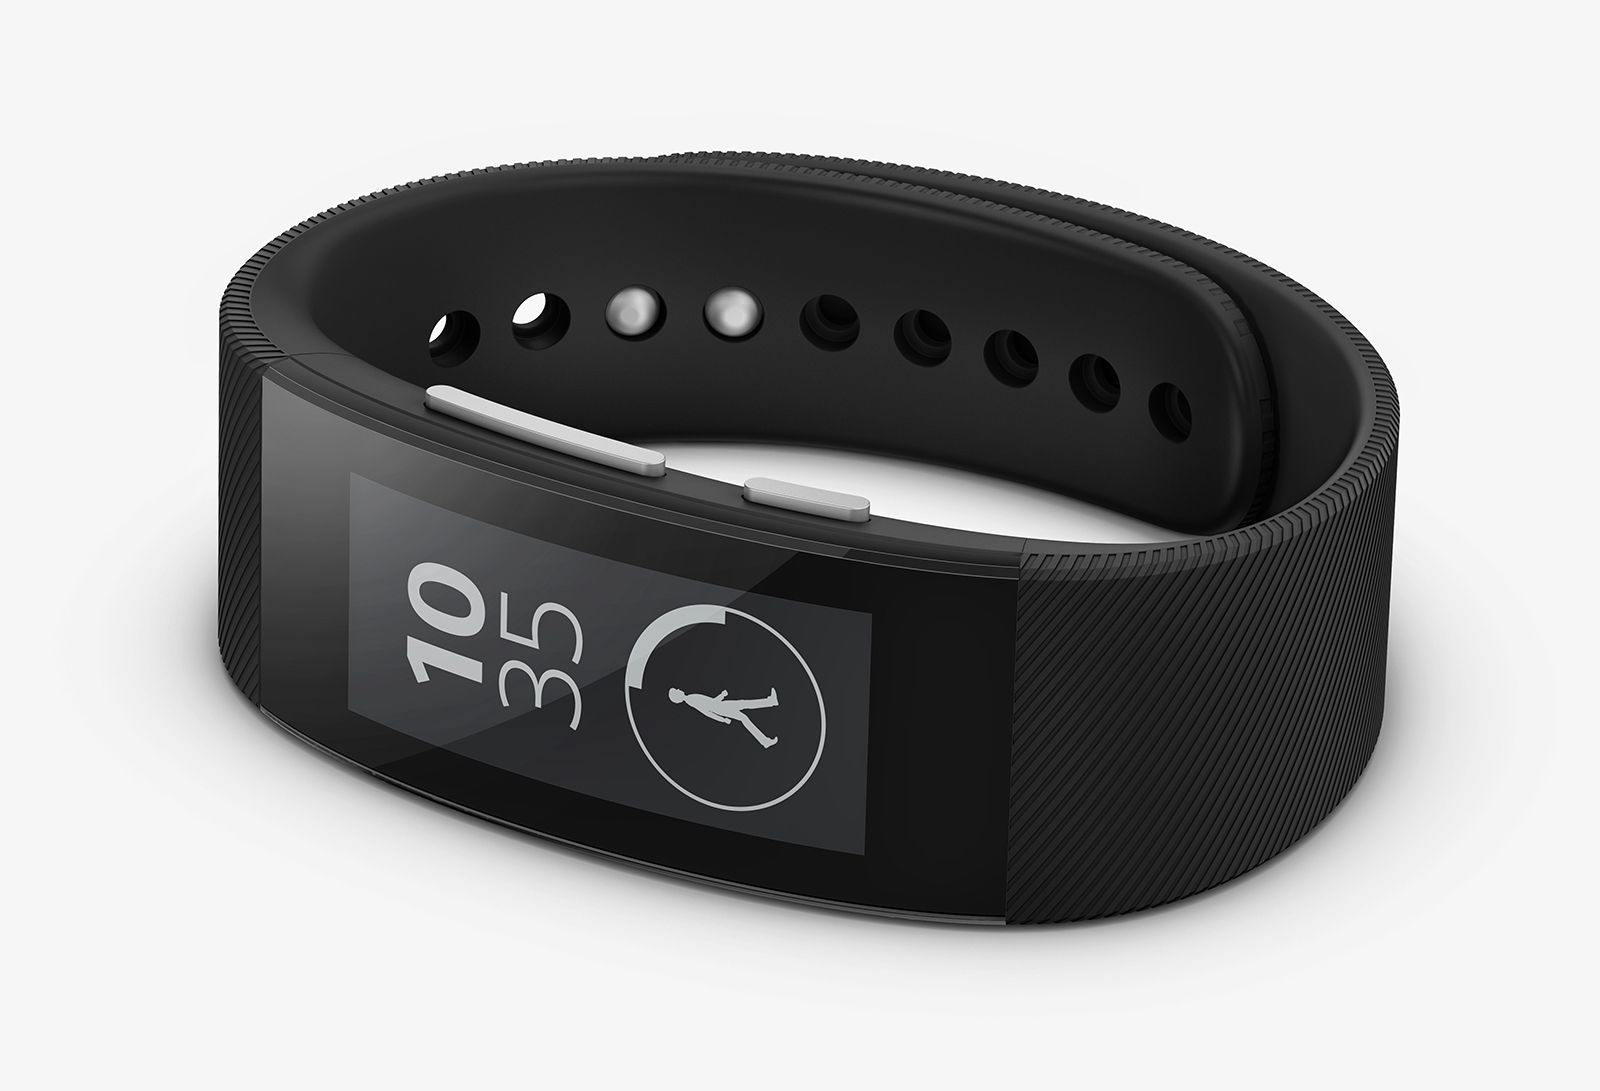 sony s next smartwatch could have an e paper screen image 1